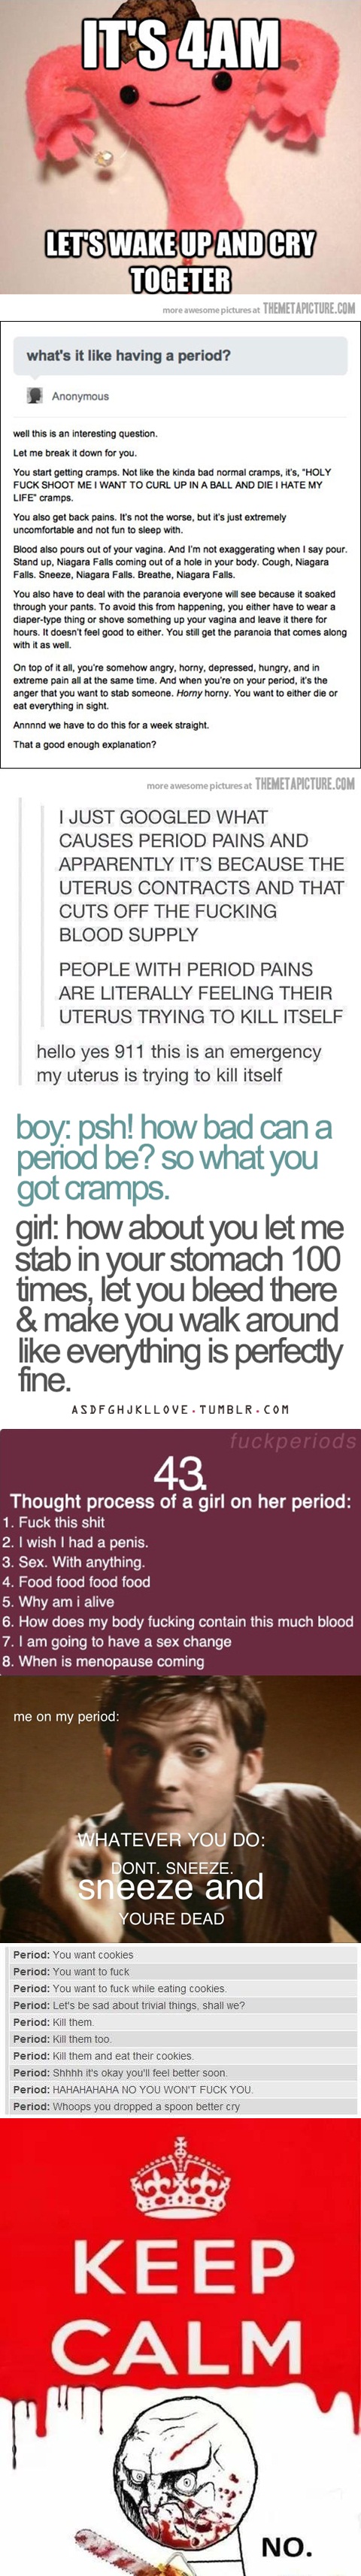 Oh period...you're so funny :|